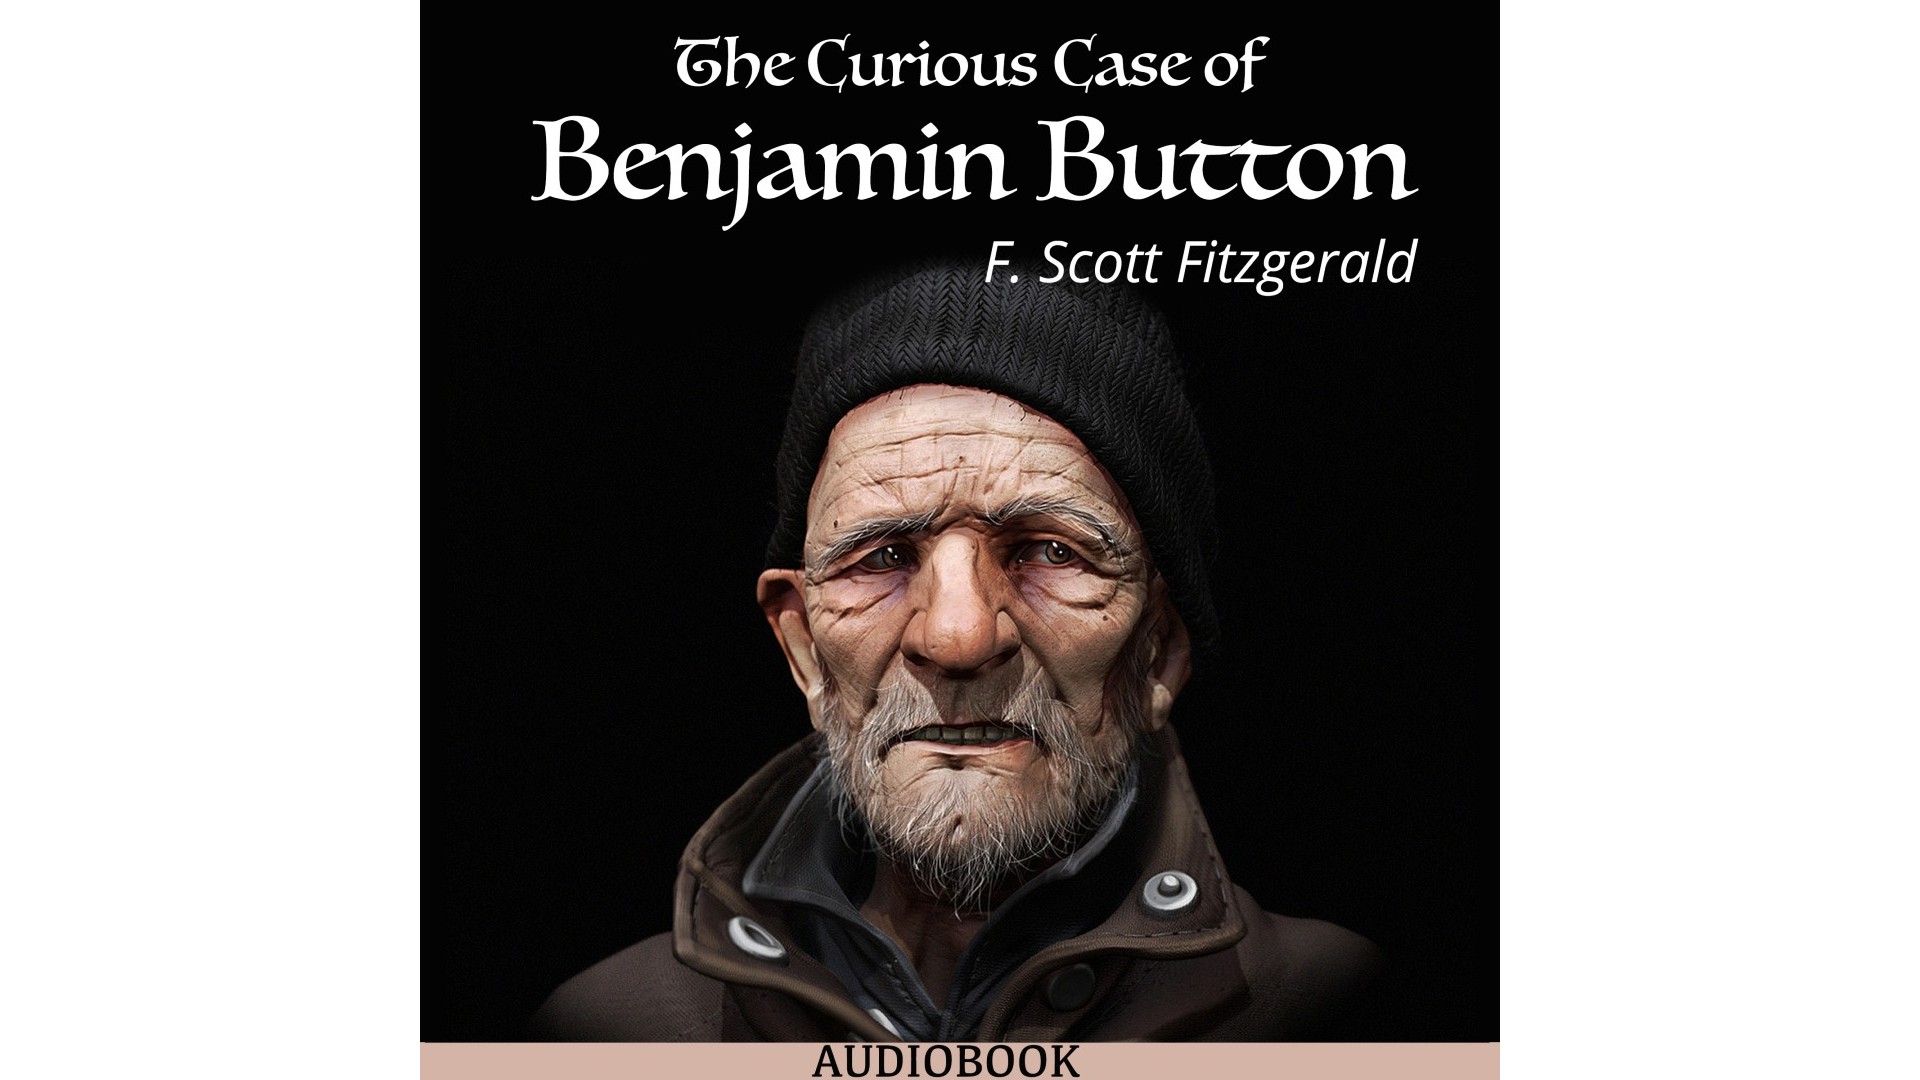 Cover of audiobook featuring photo of old man